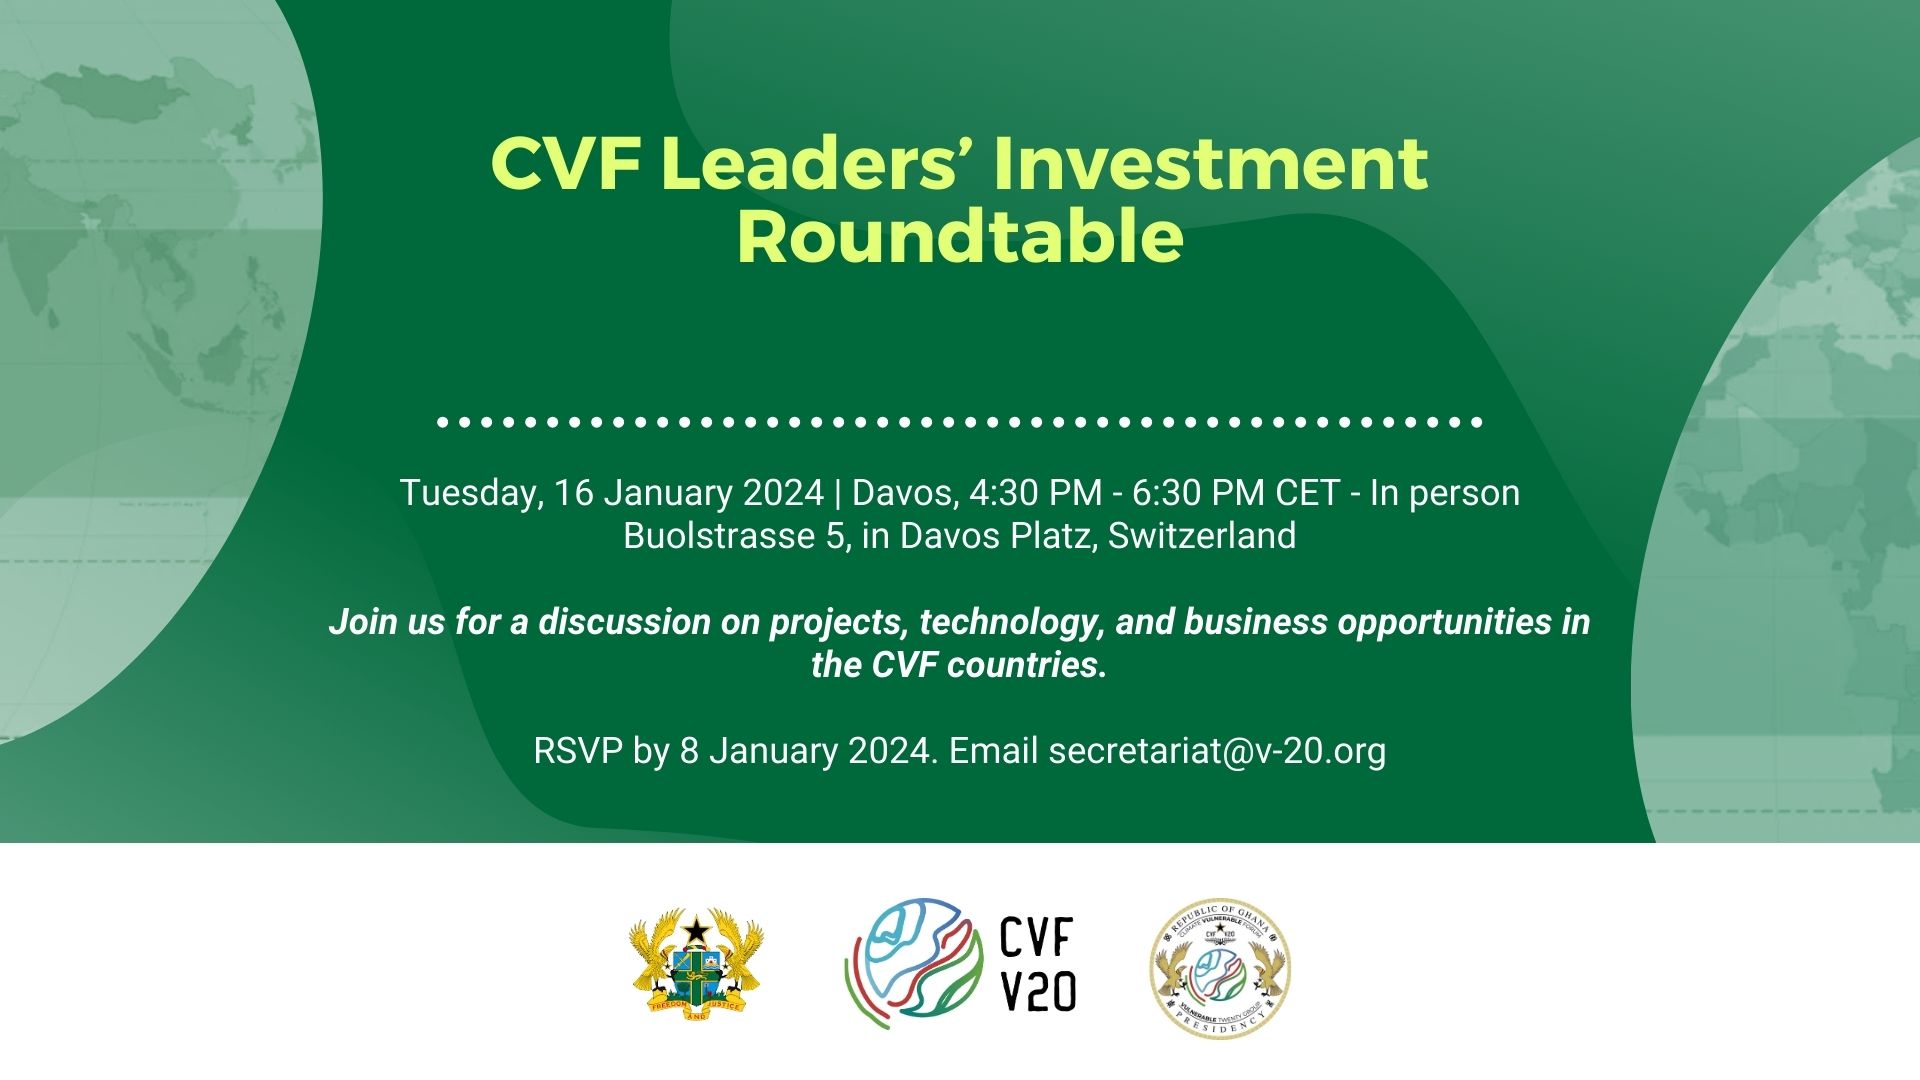 CVF Leaders’ Investment Roundtable 2